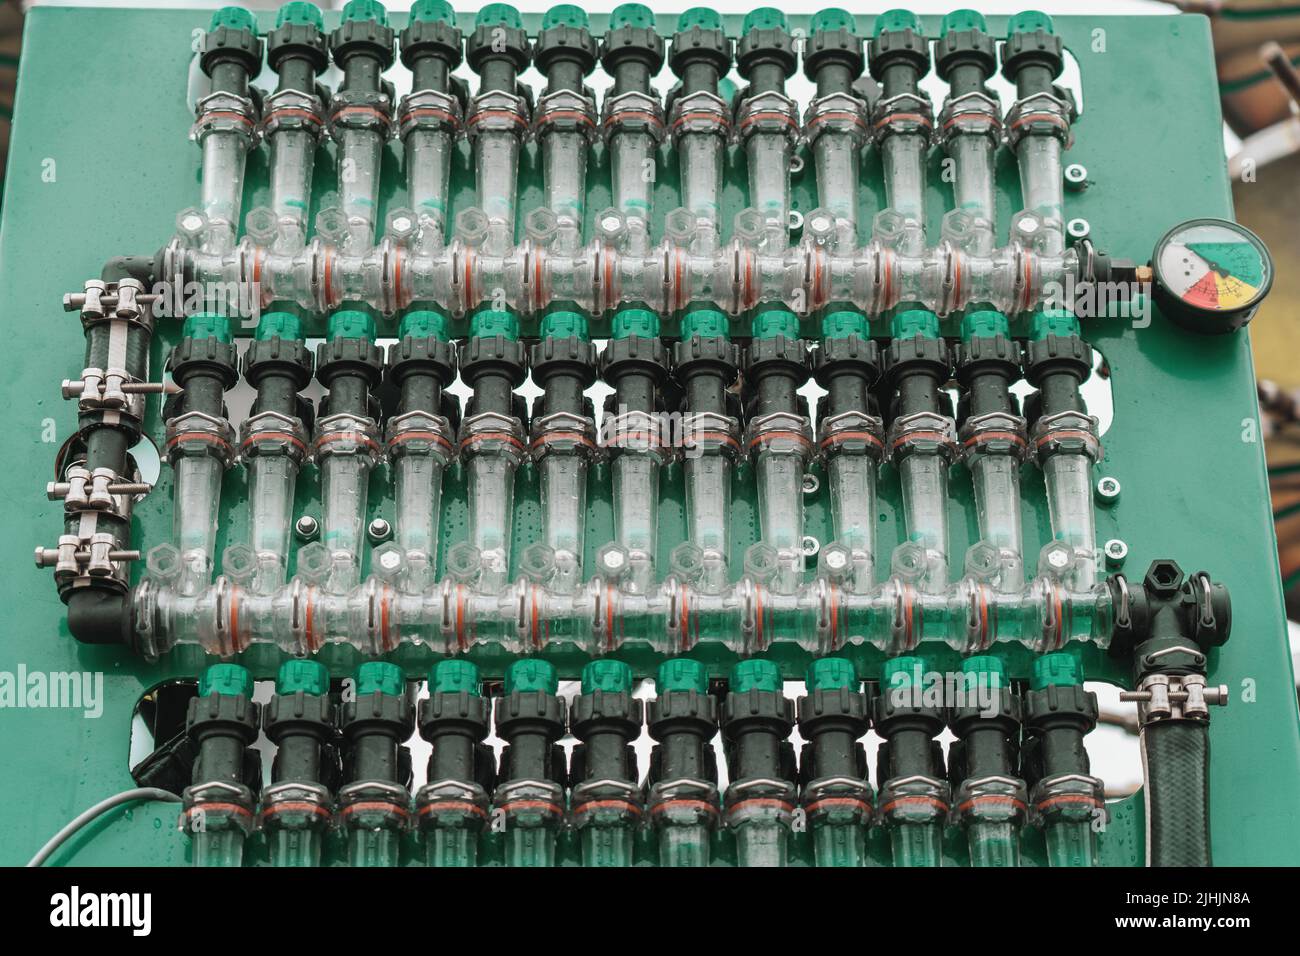 Plastic pipes, connections and pressure gauge for irrigation system or spraying agricultural fields and crops on industrial machinery. Stock Photo